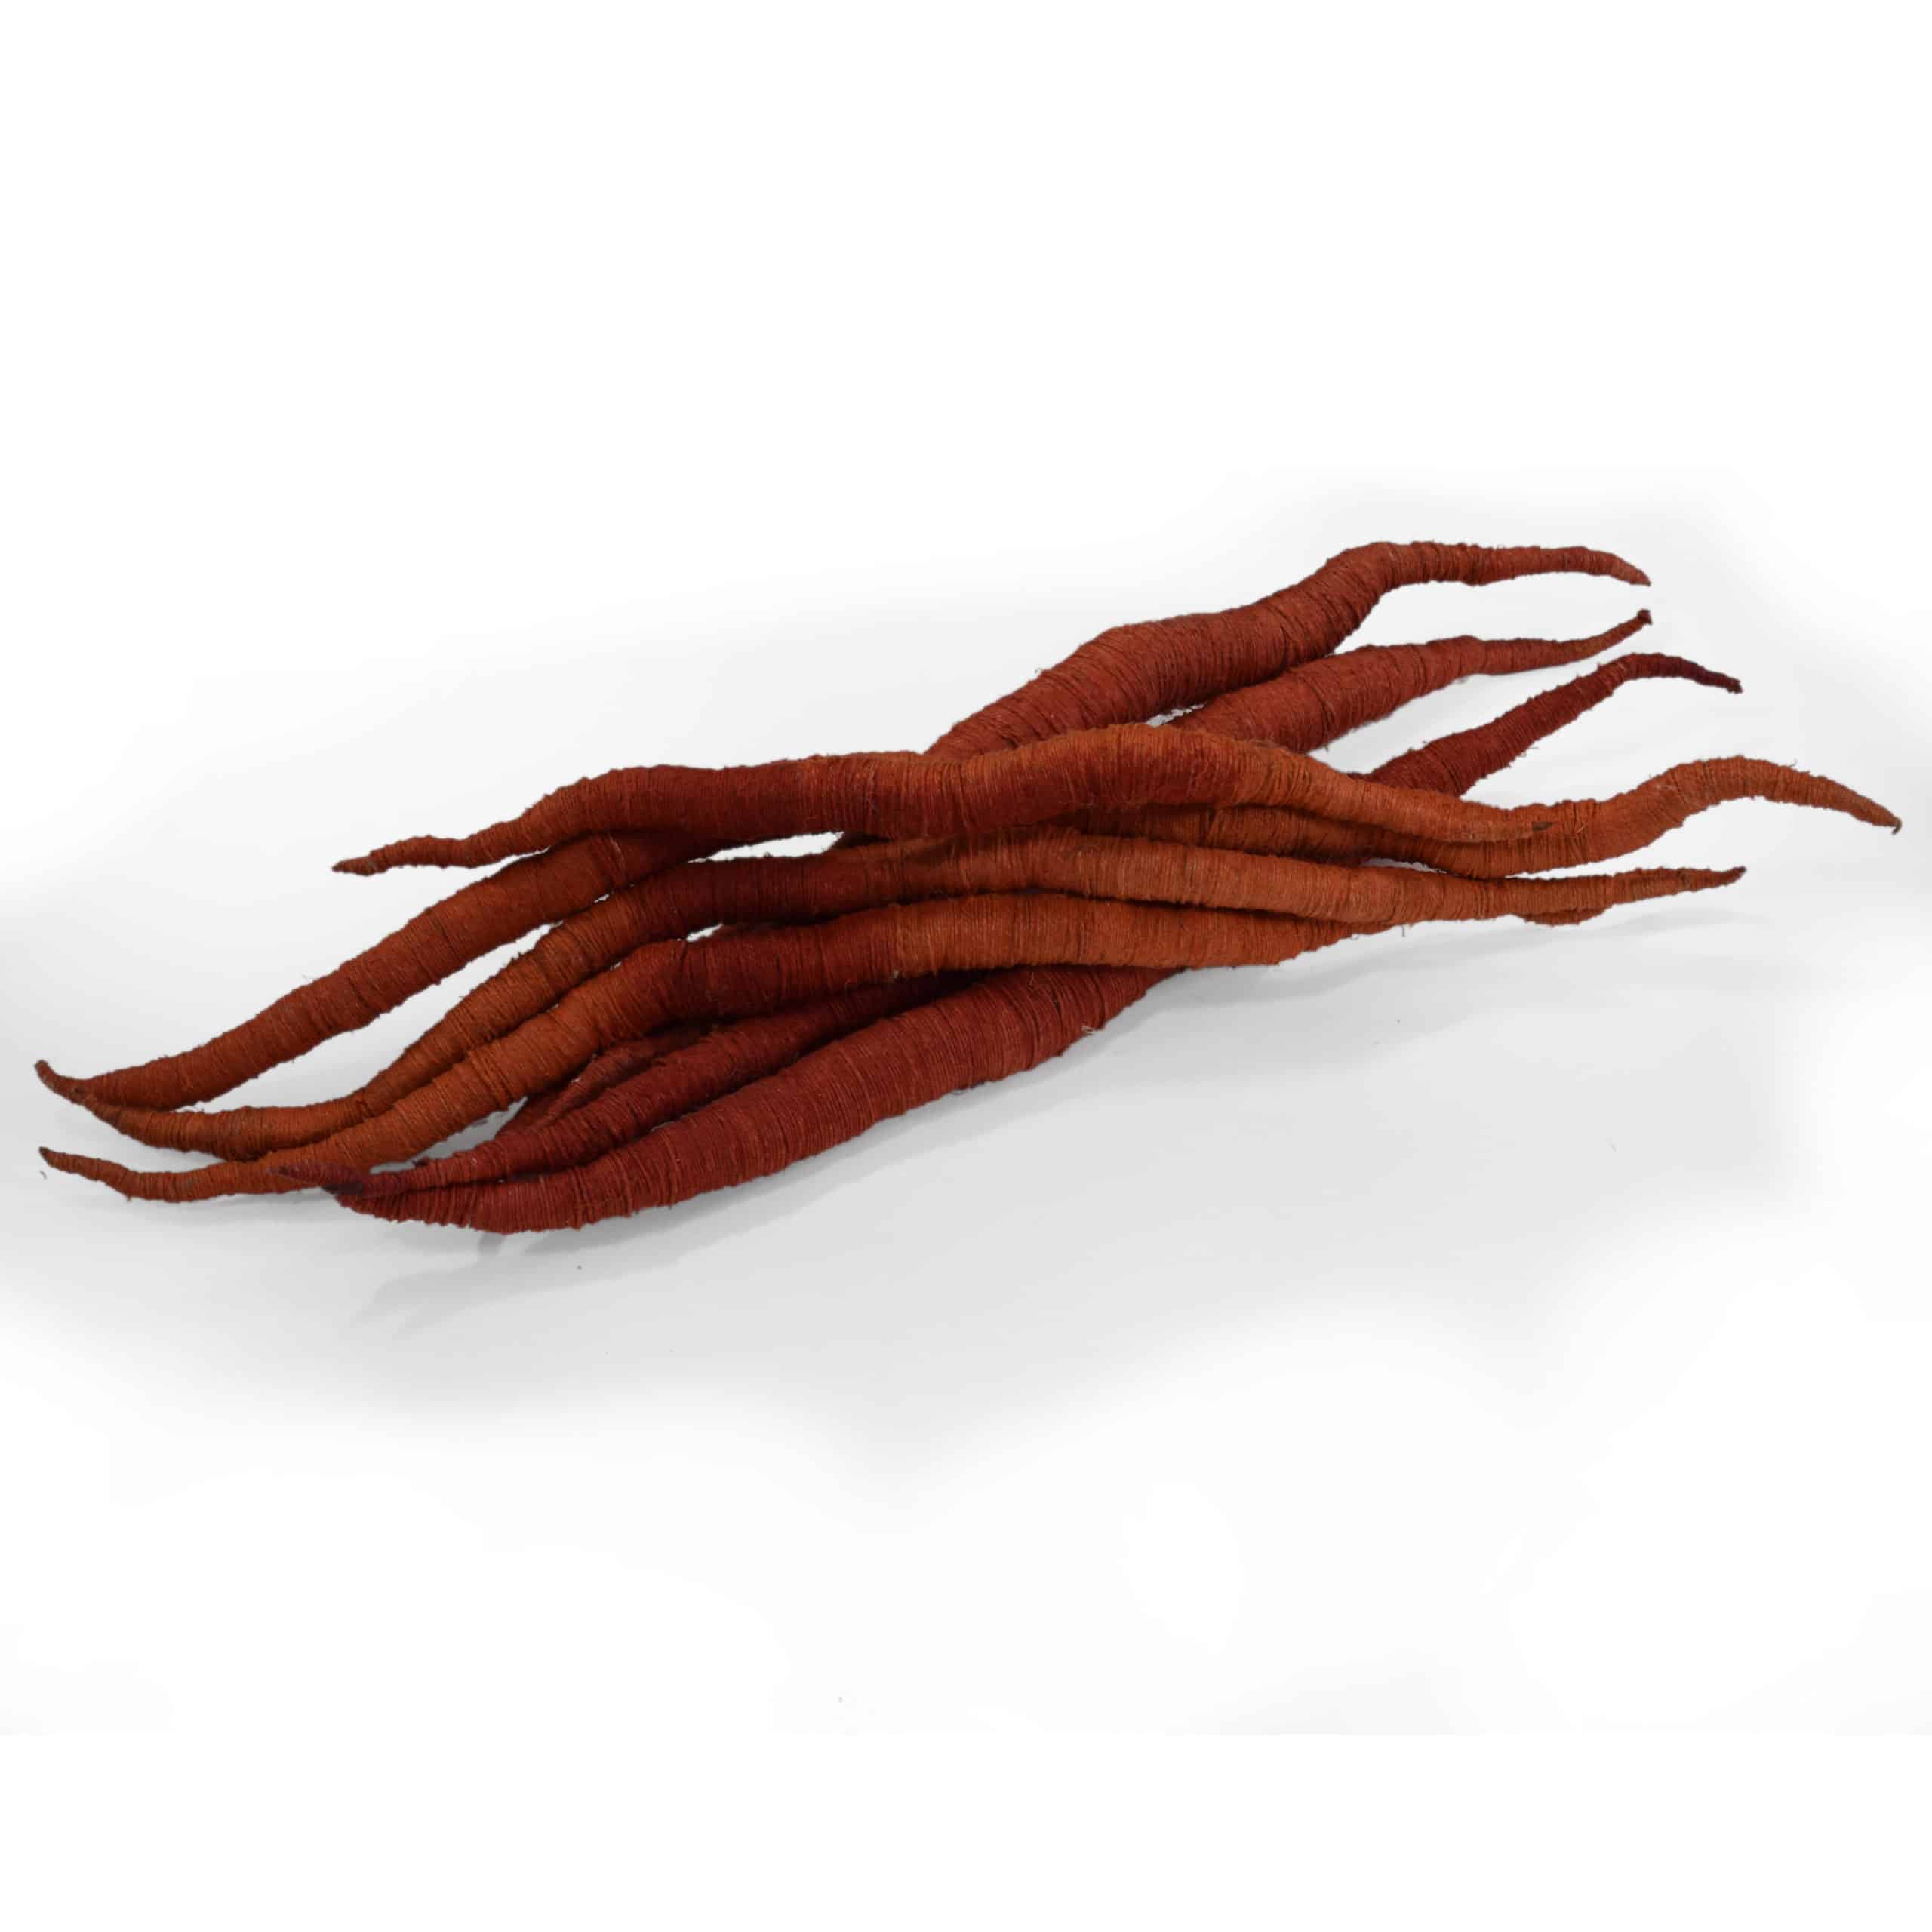 Picture of a red sculpture on white background by artist Aude Franjou. The sculpture resembles something vegetal